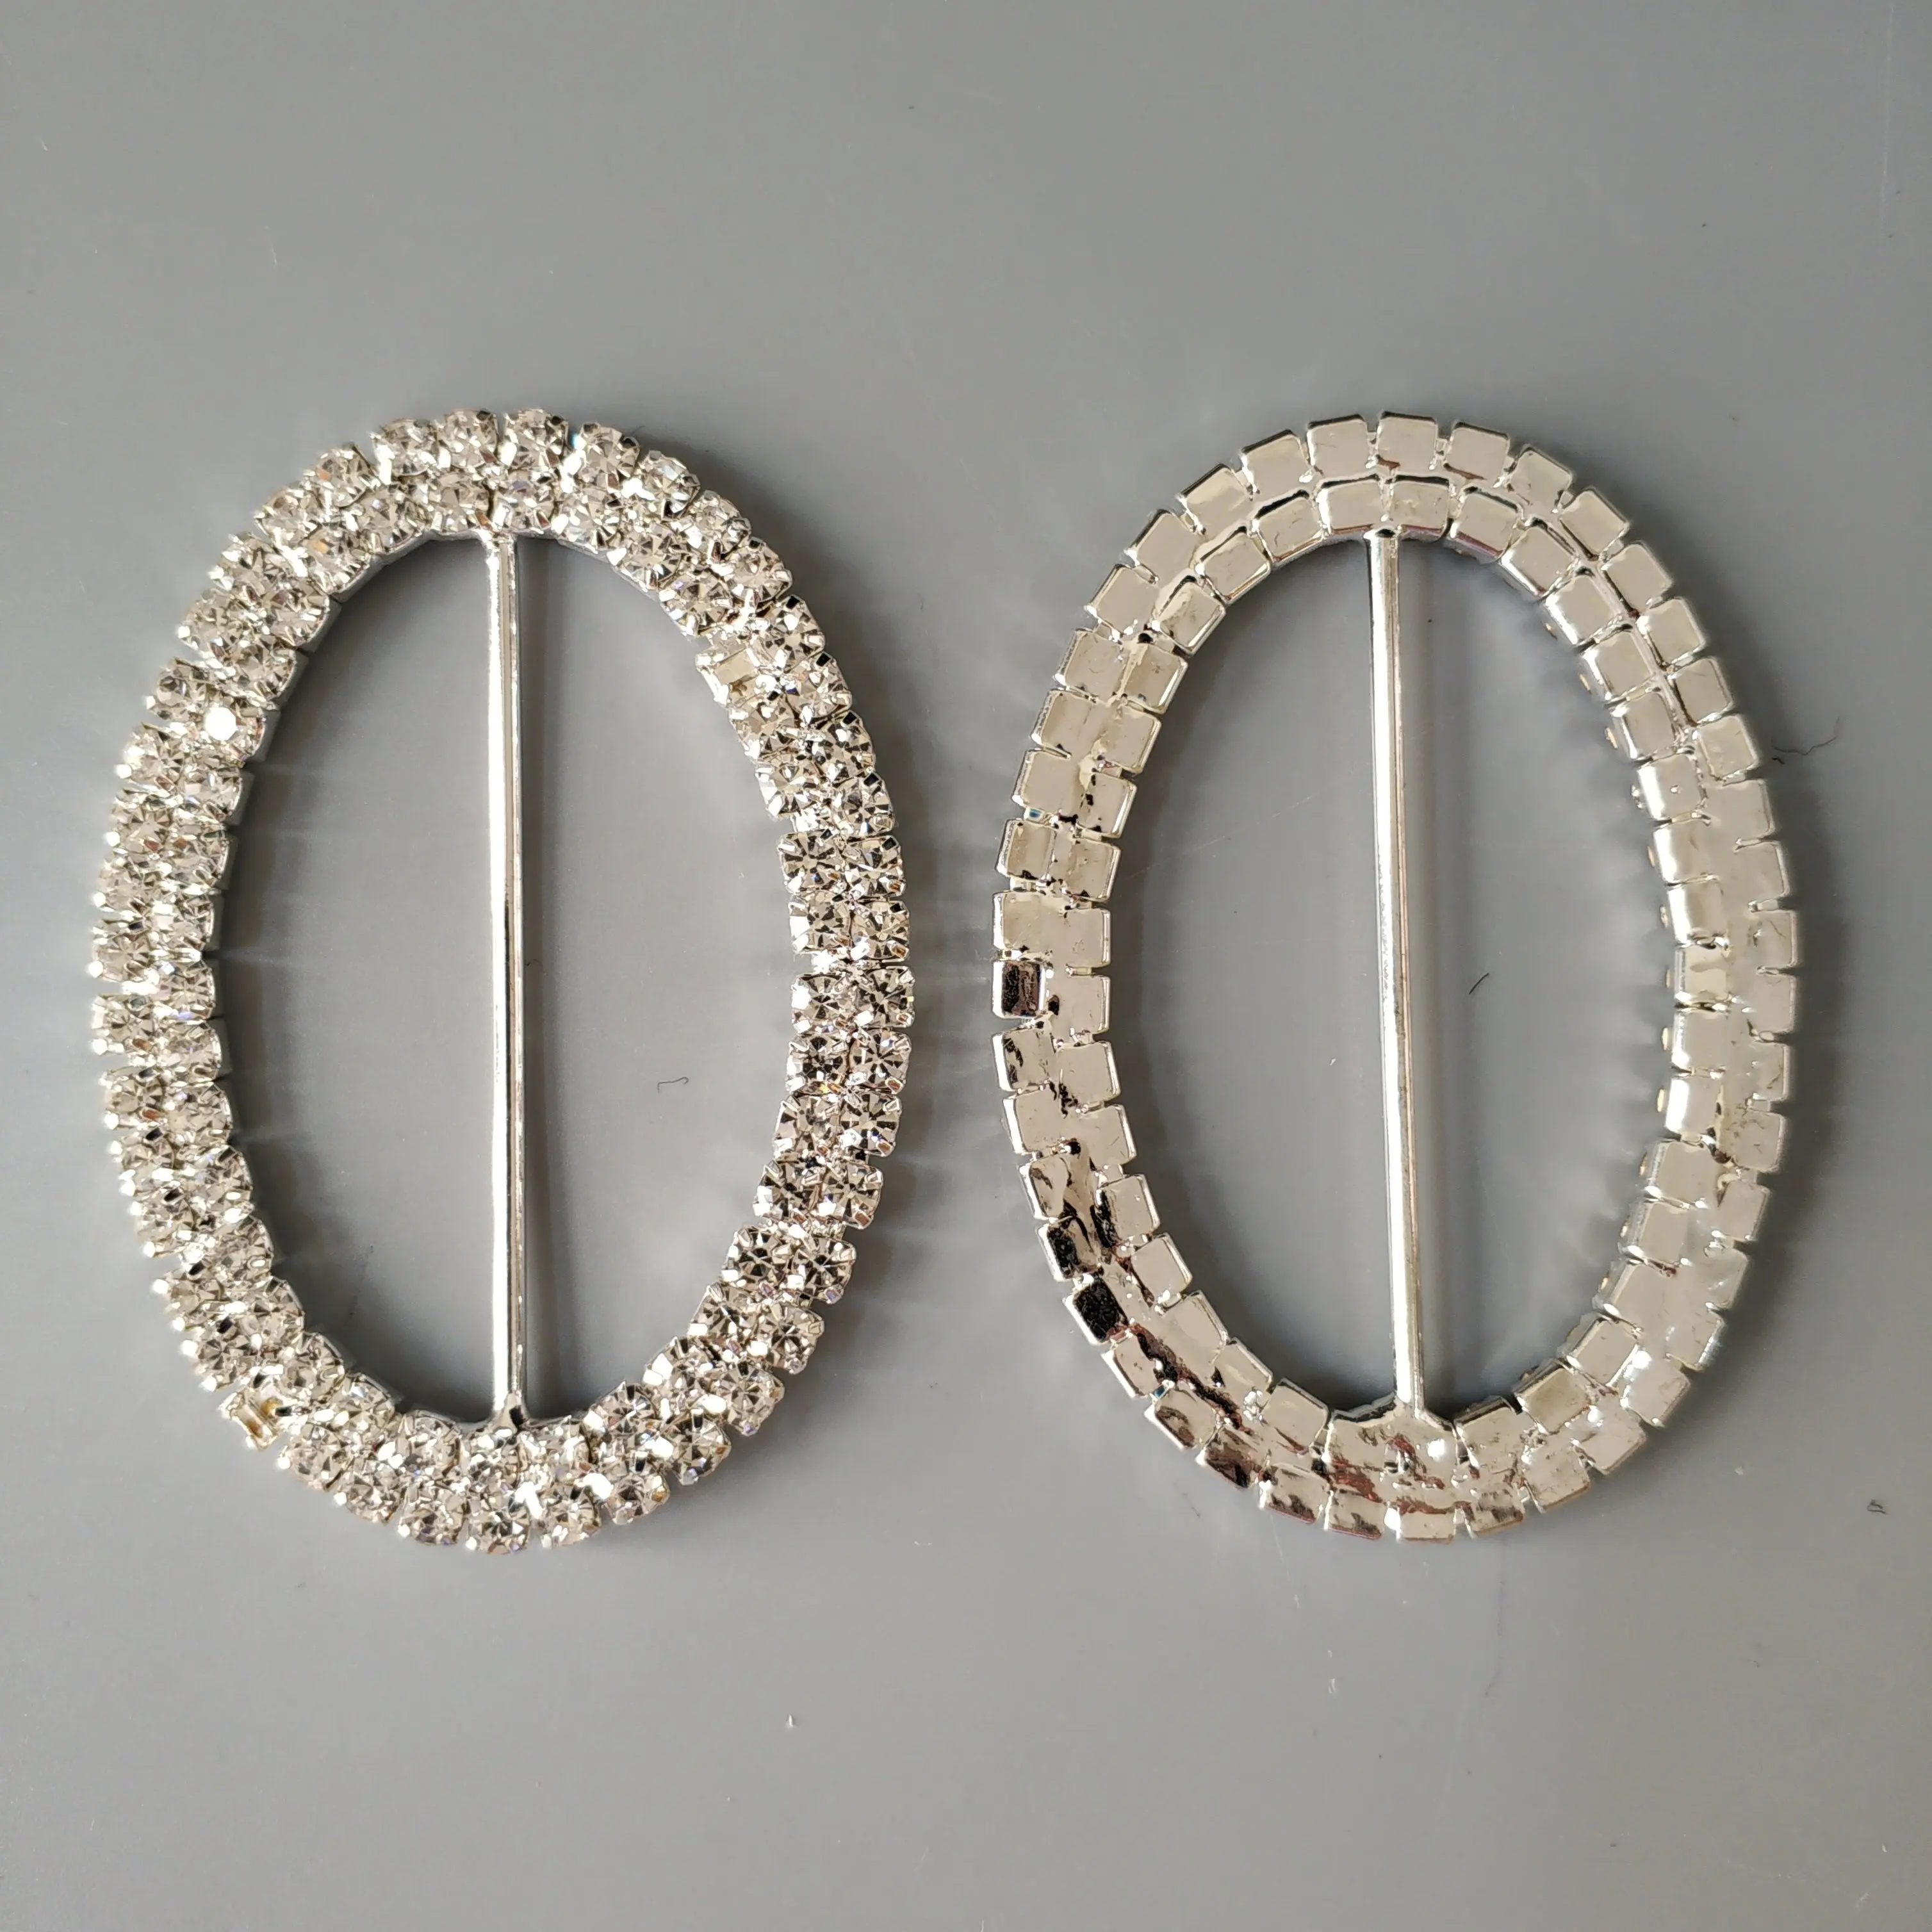 5cm elegant Oval rhinestone buckle for skirt and top set